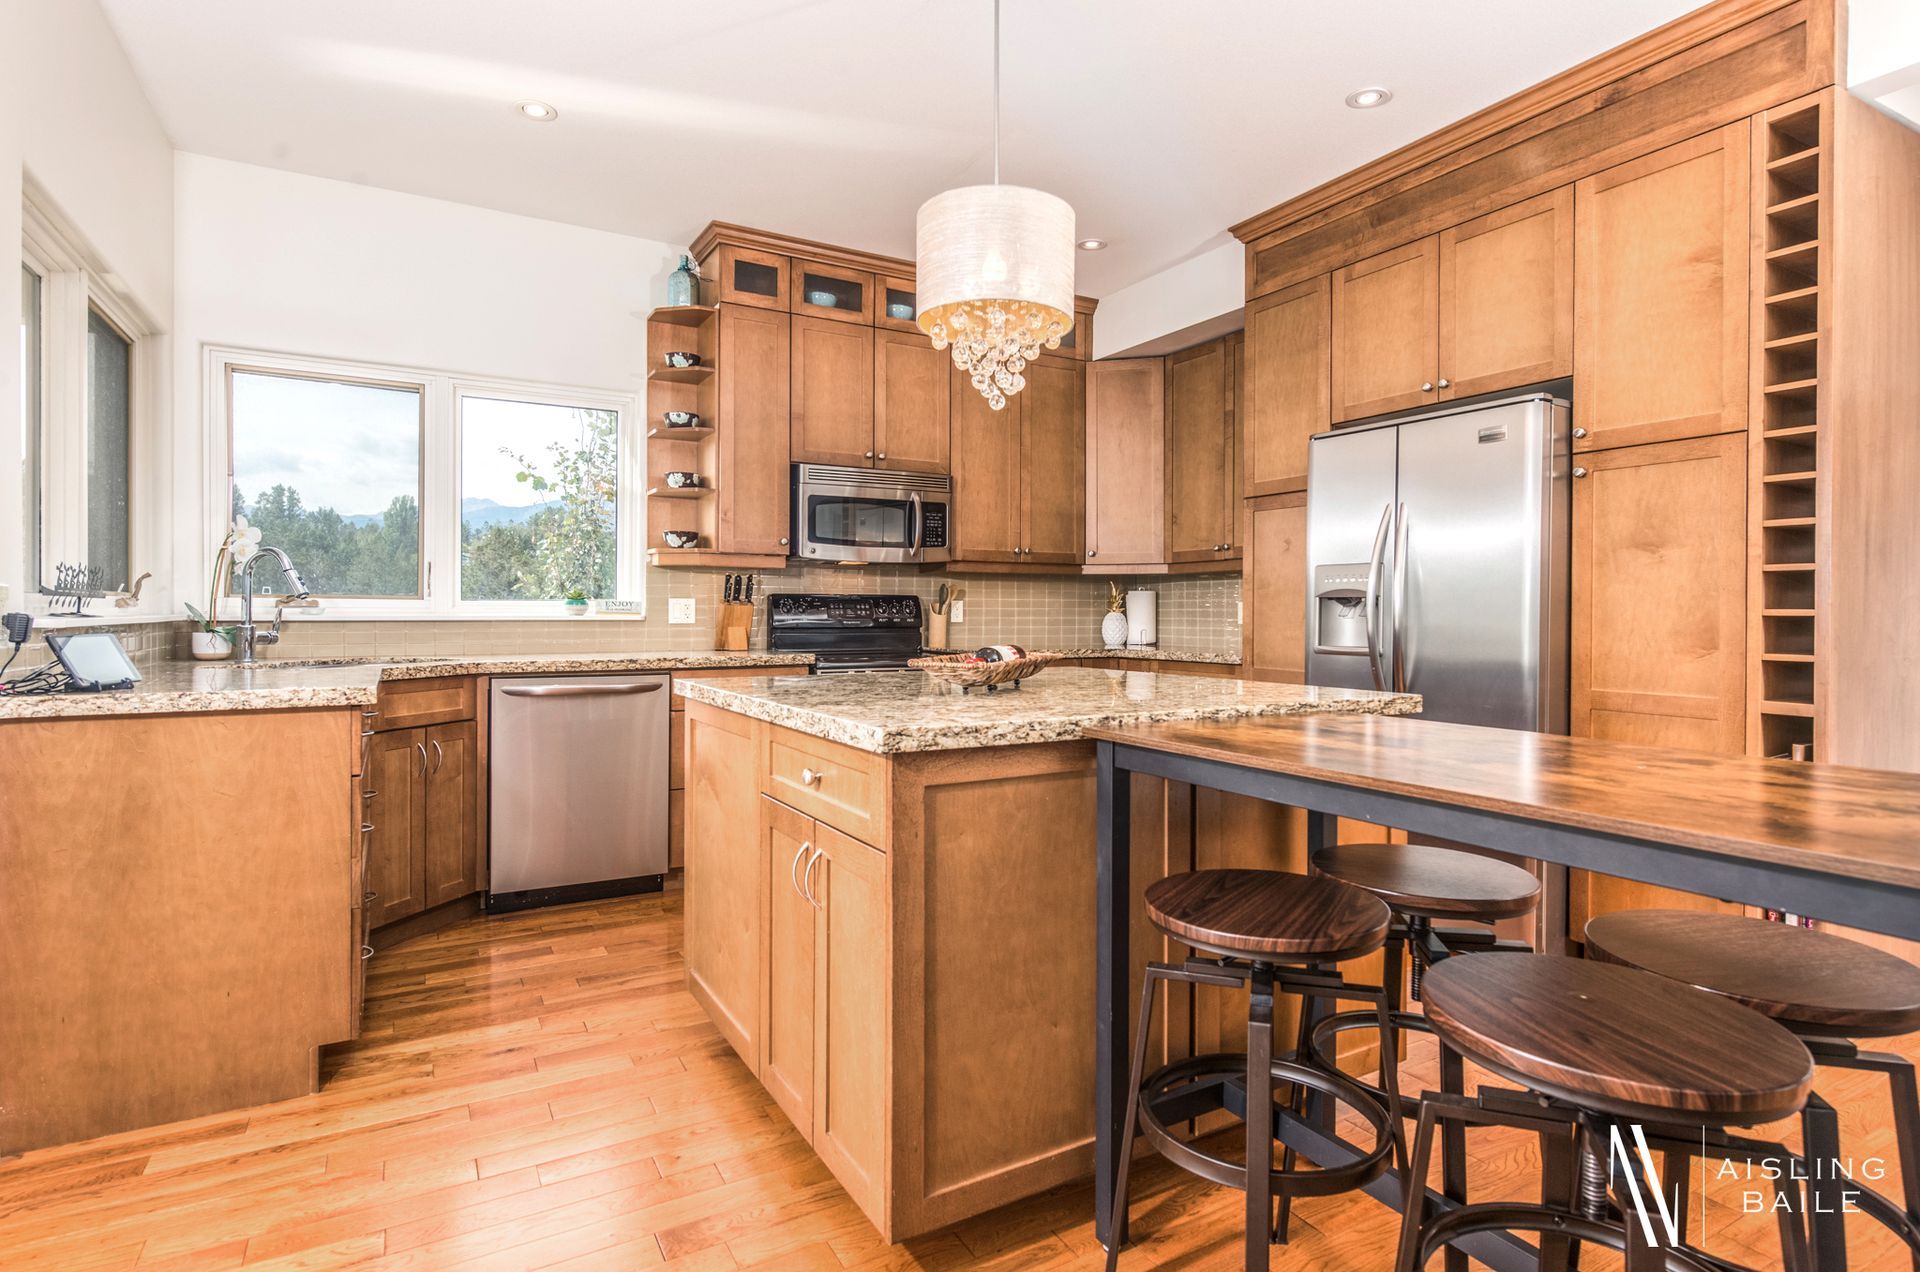 Full chef's kitchen of the Central Elegance, an Invermere BC Vacation Rental hosted by Aisling Baile Property Management.